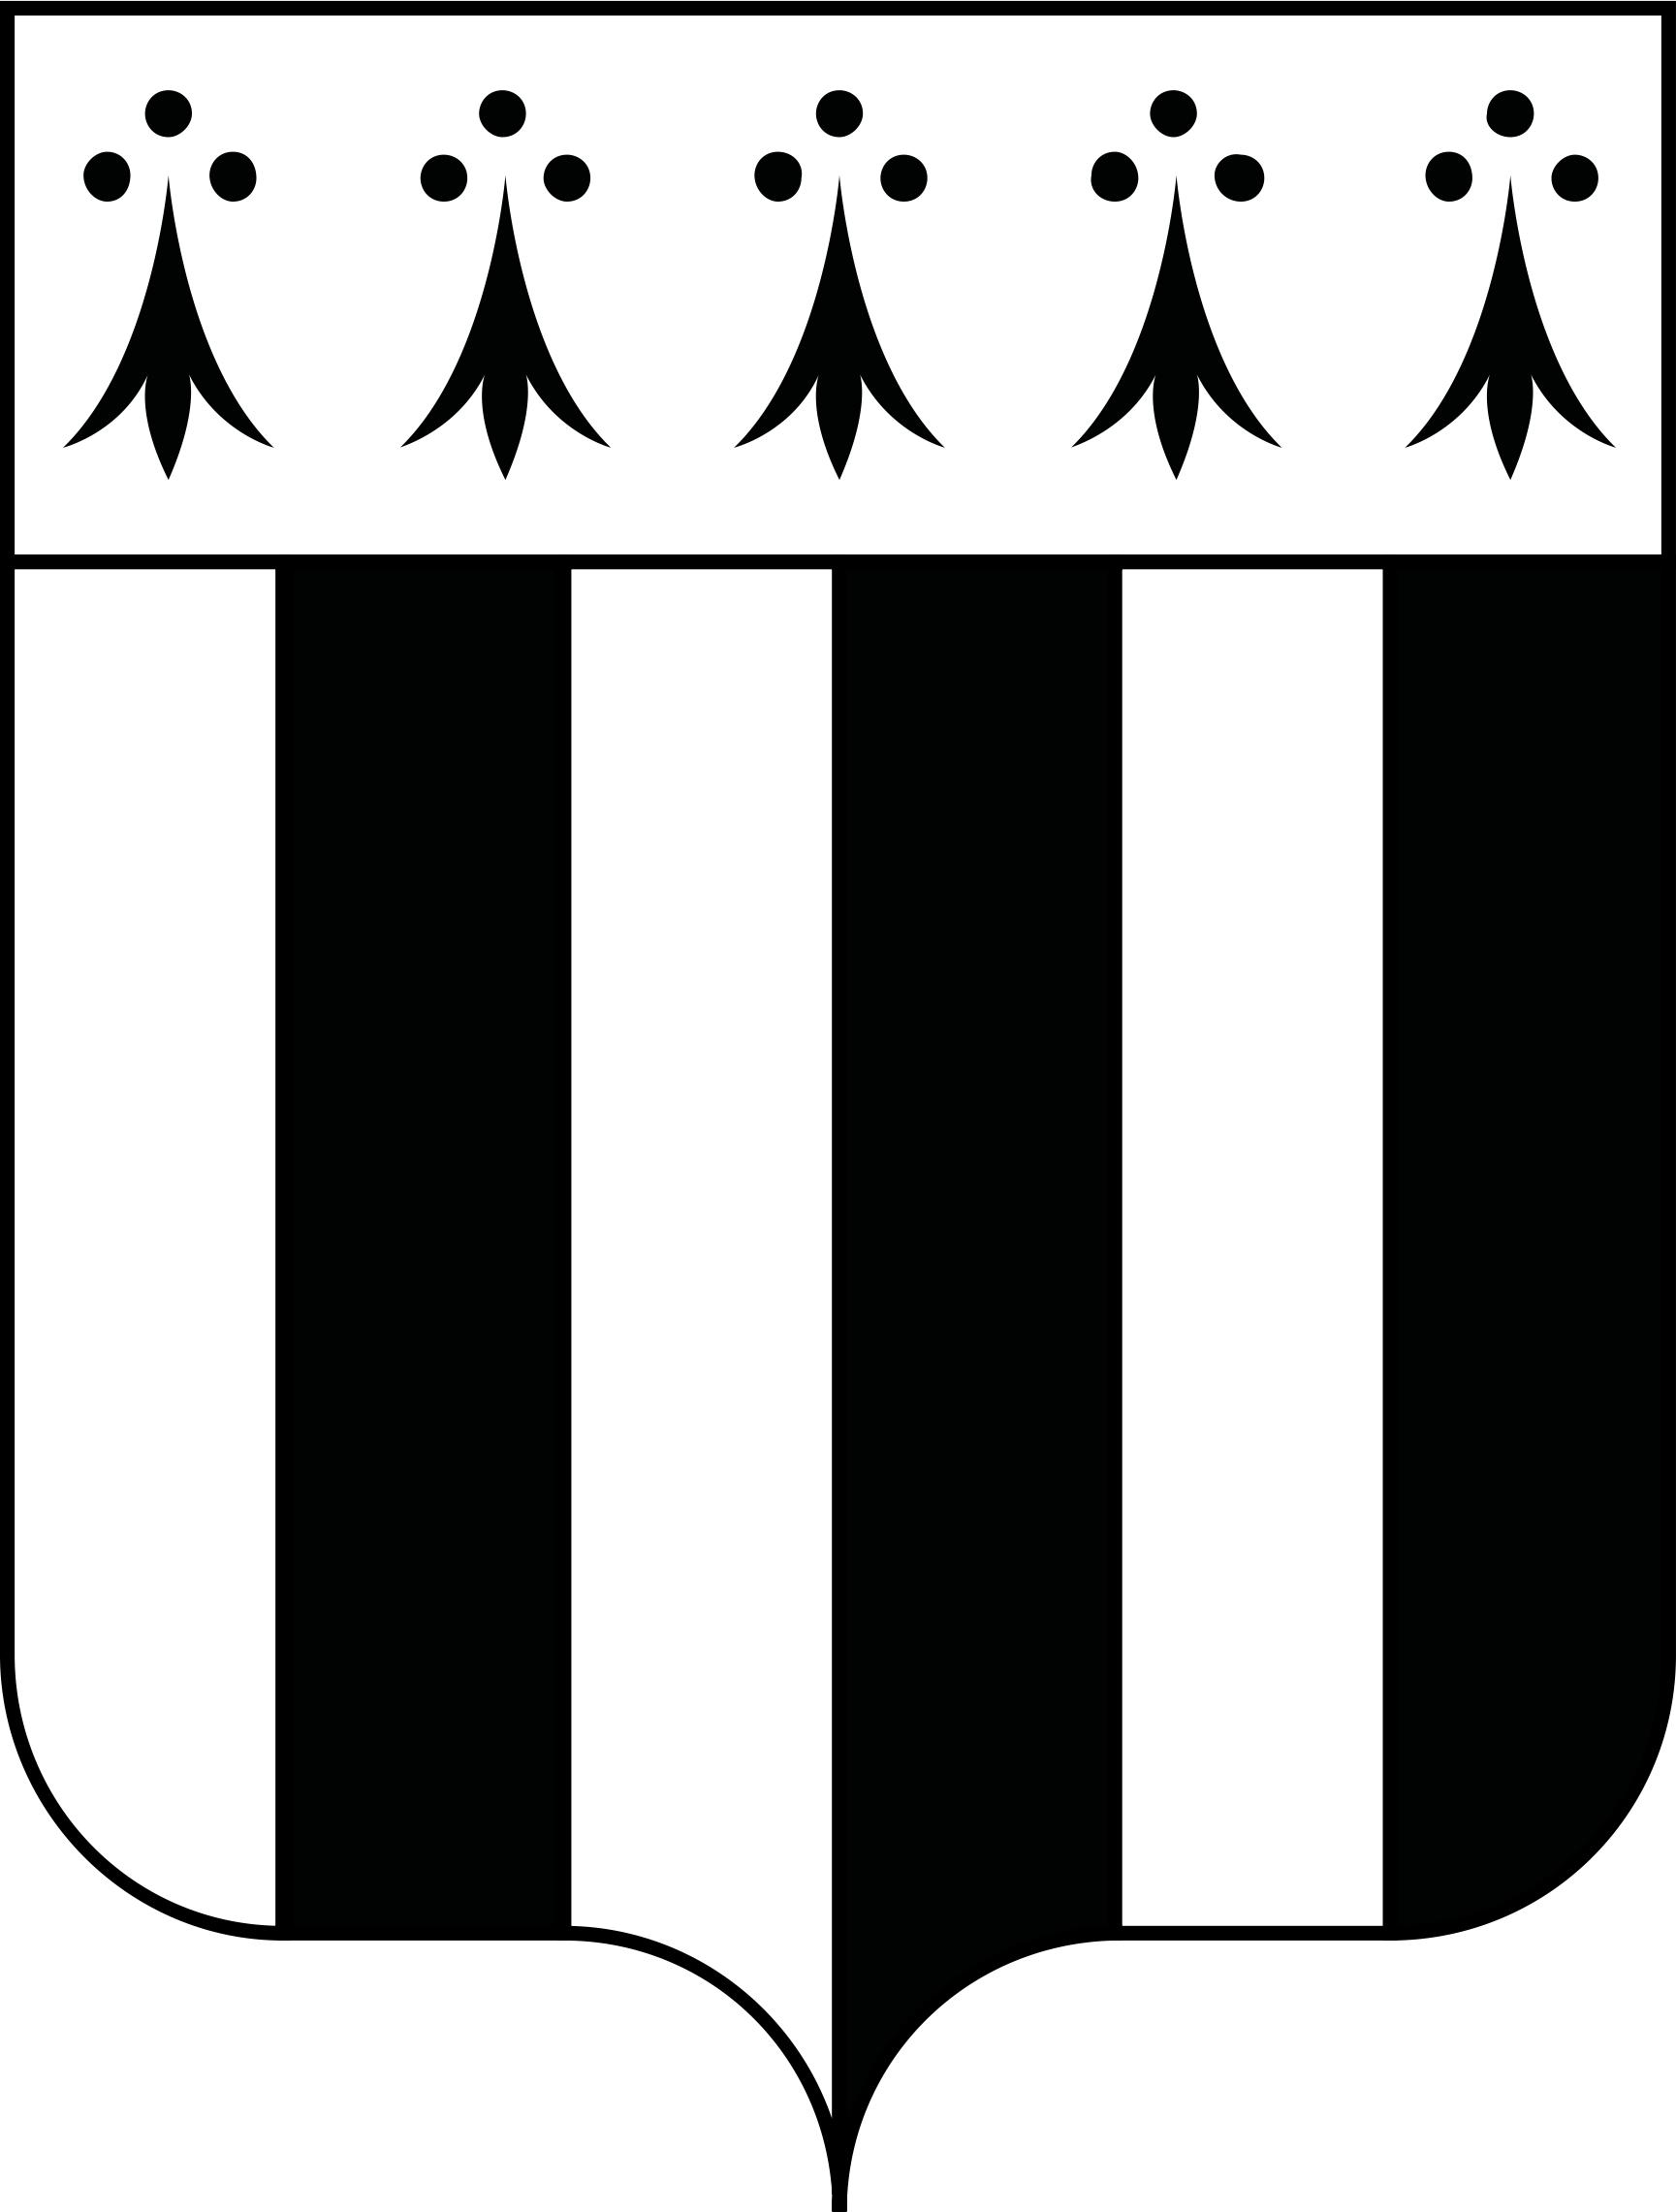 Coat of Arms of Rennes, France png